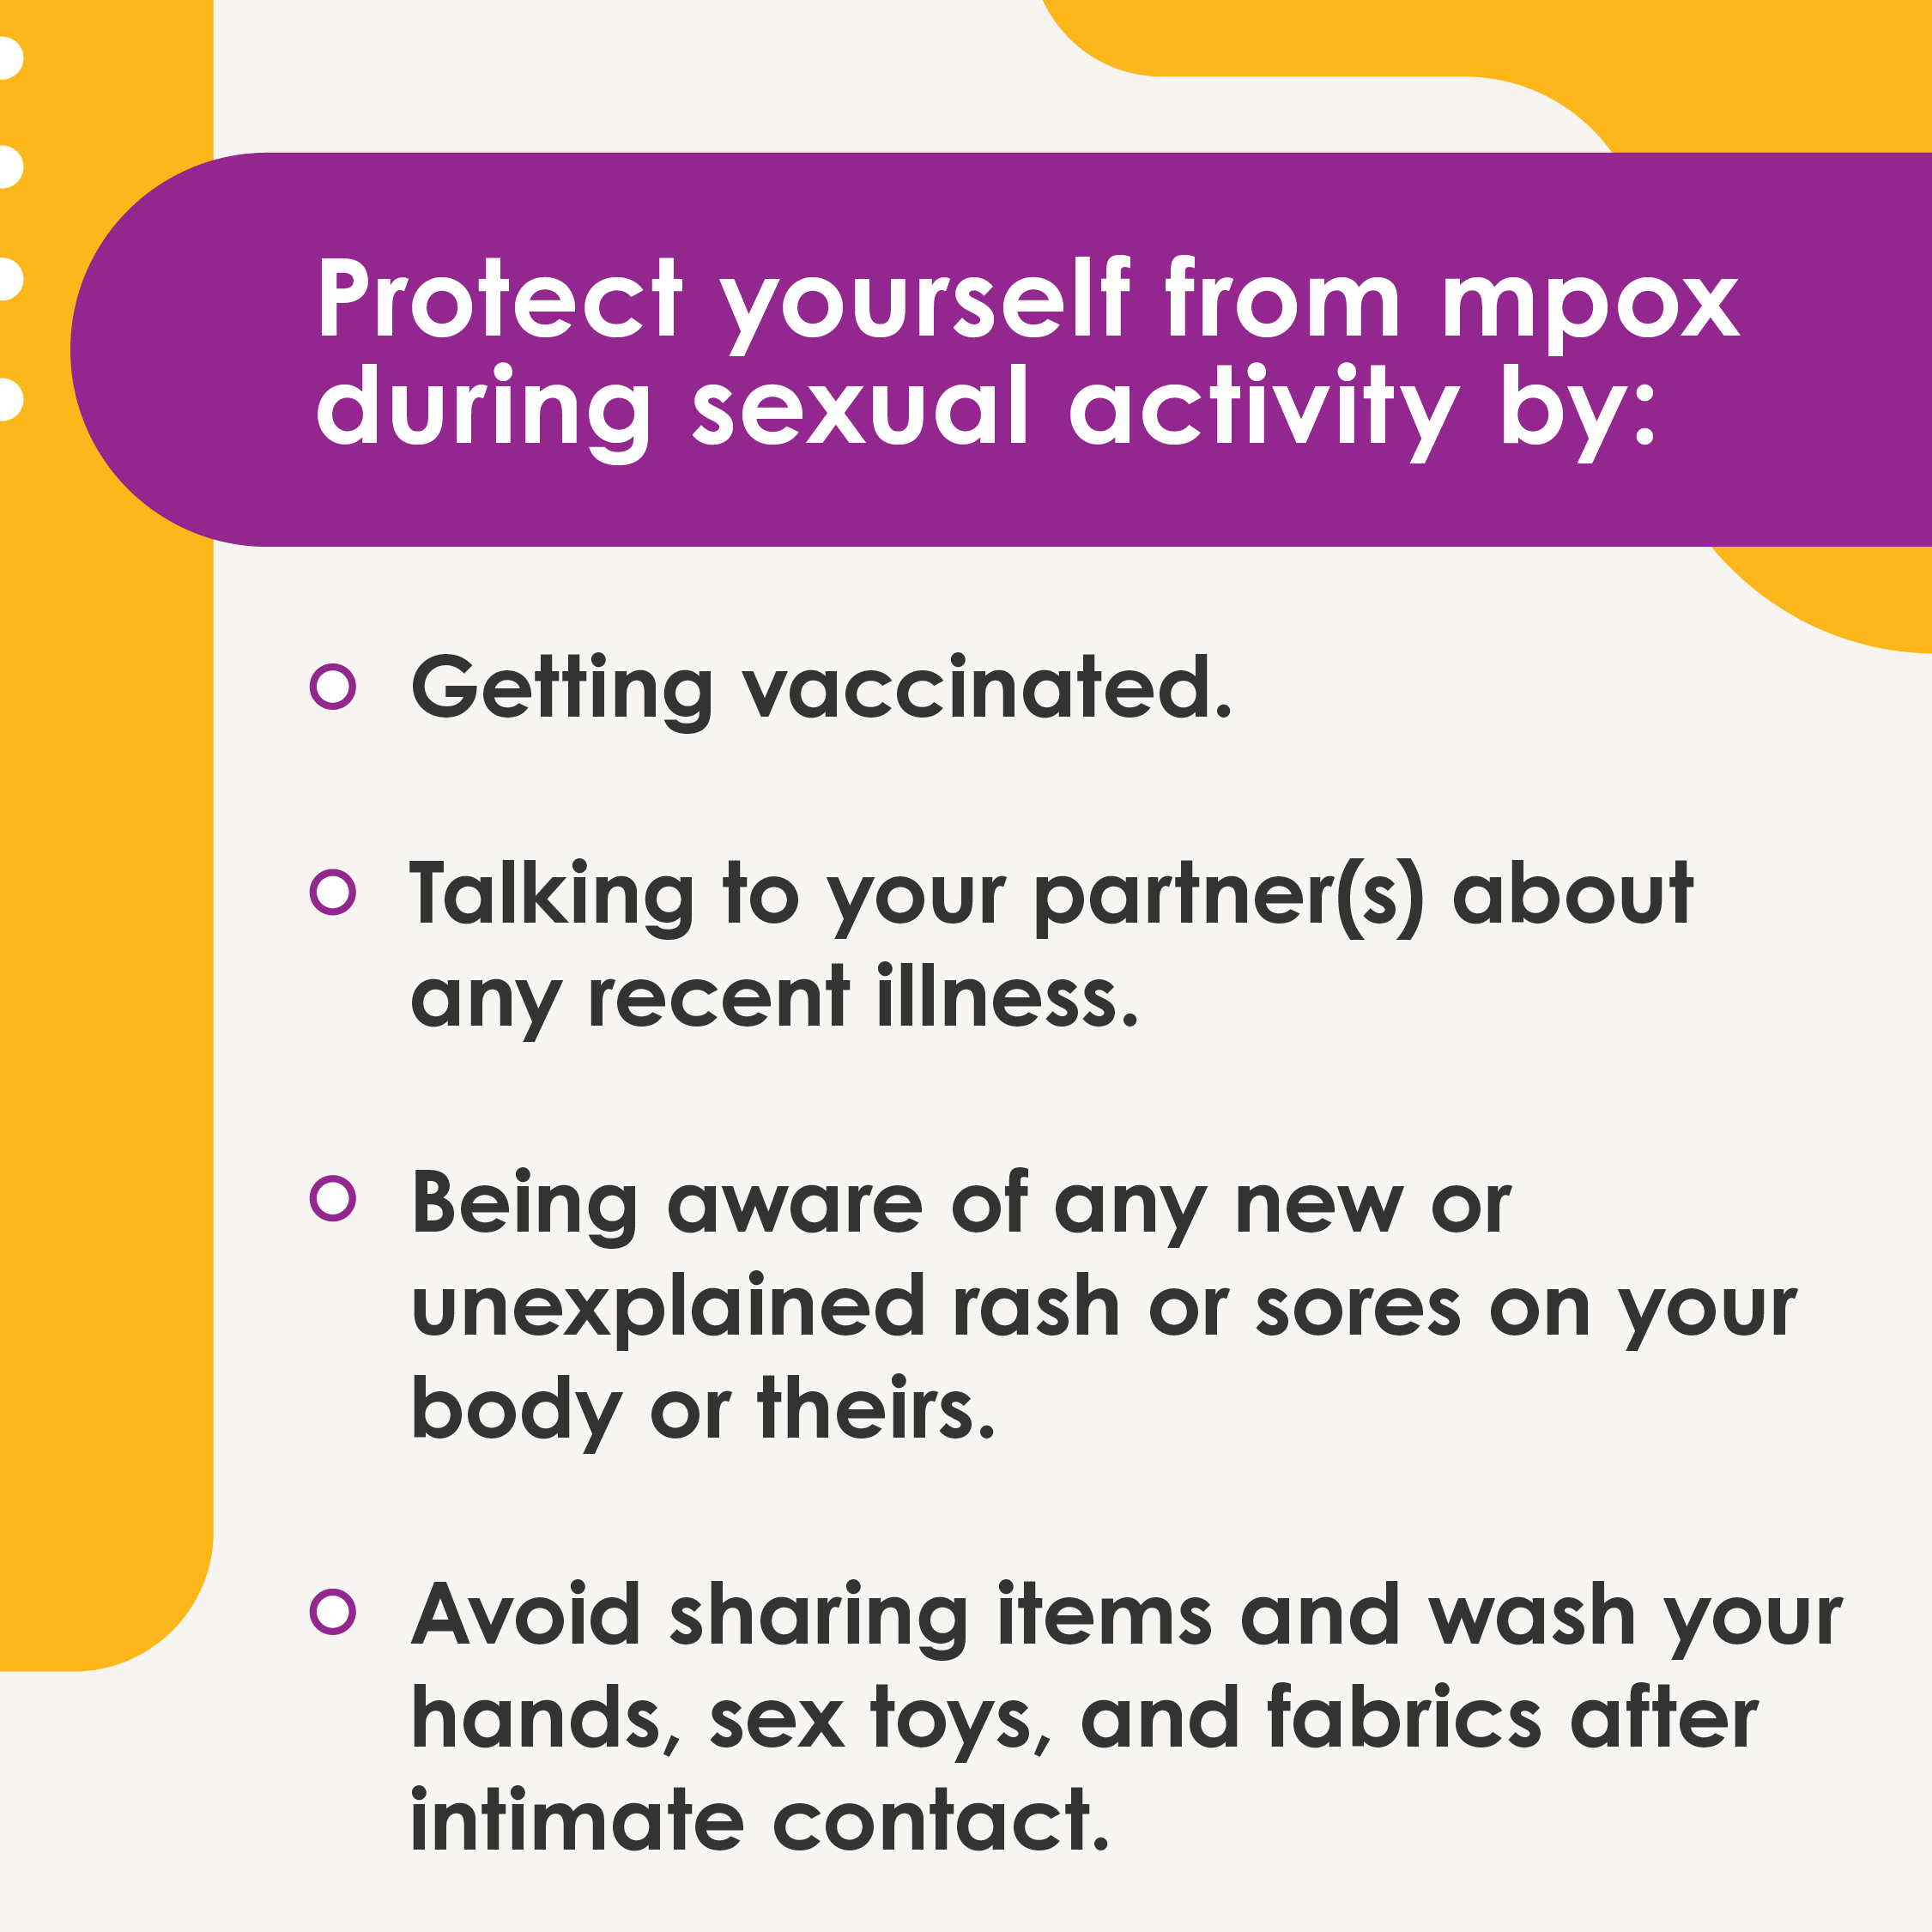 Protect yourself from  MPX during sexual activity